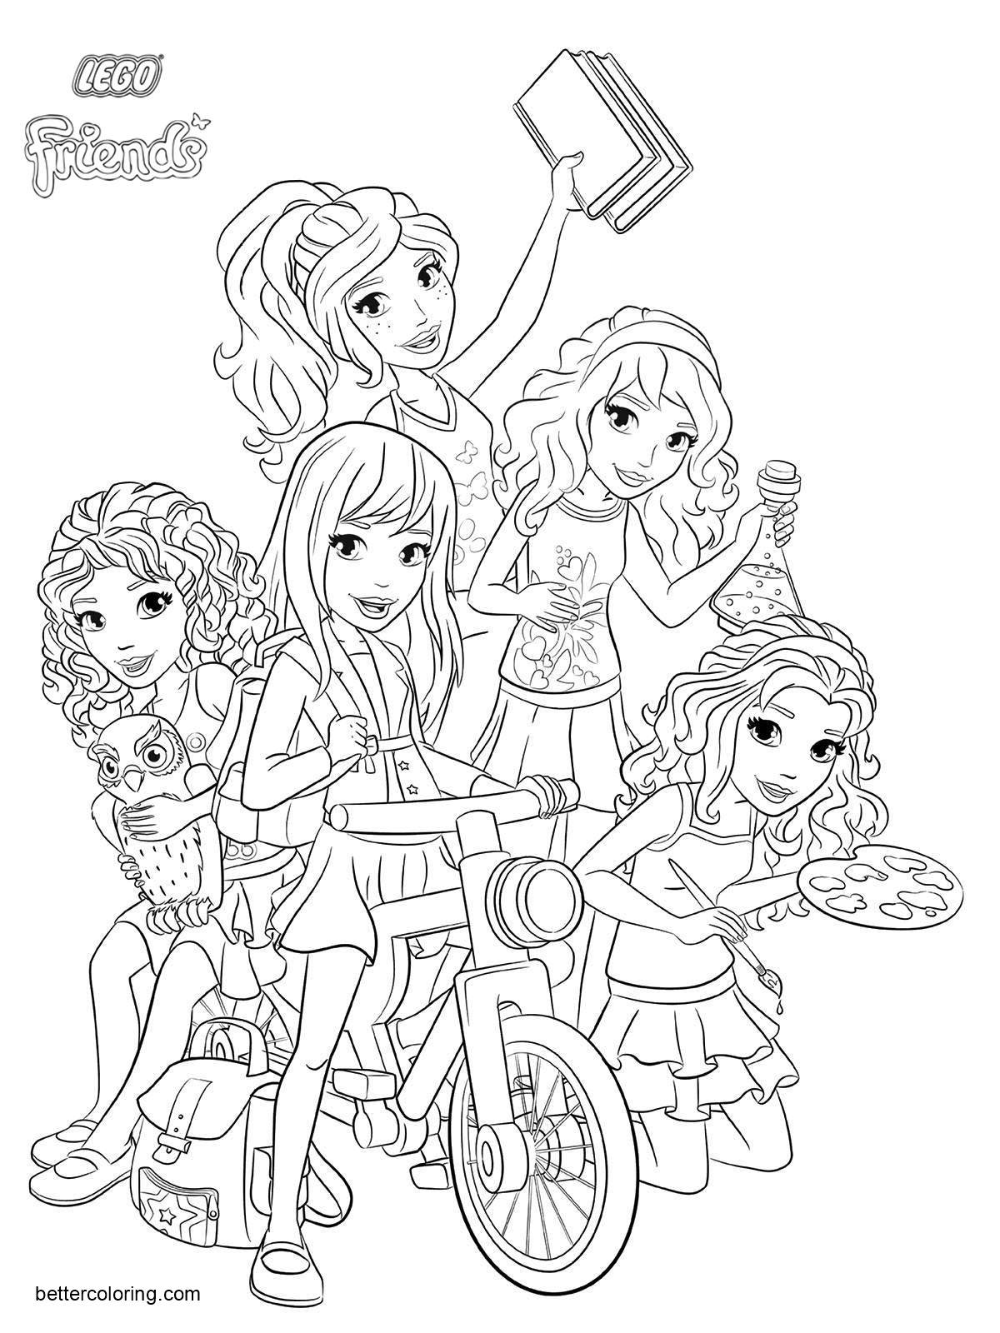 Lego Friends Coloring Pages Characters From Lego Friends Coloring Pages Free Printabl